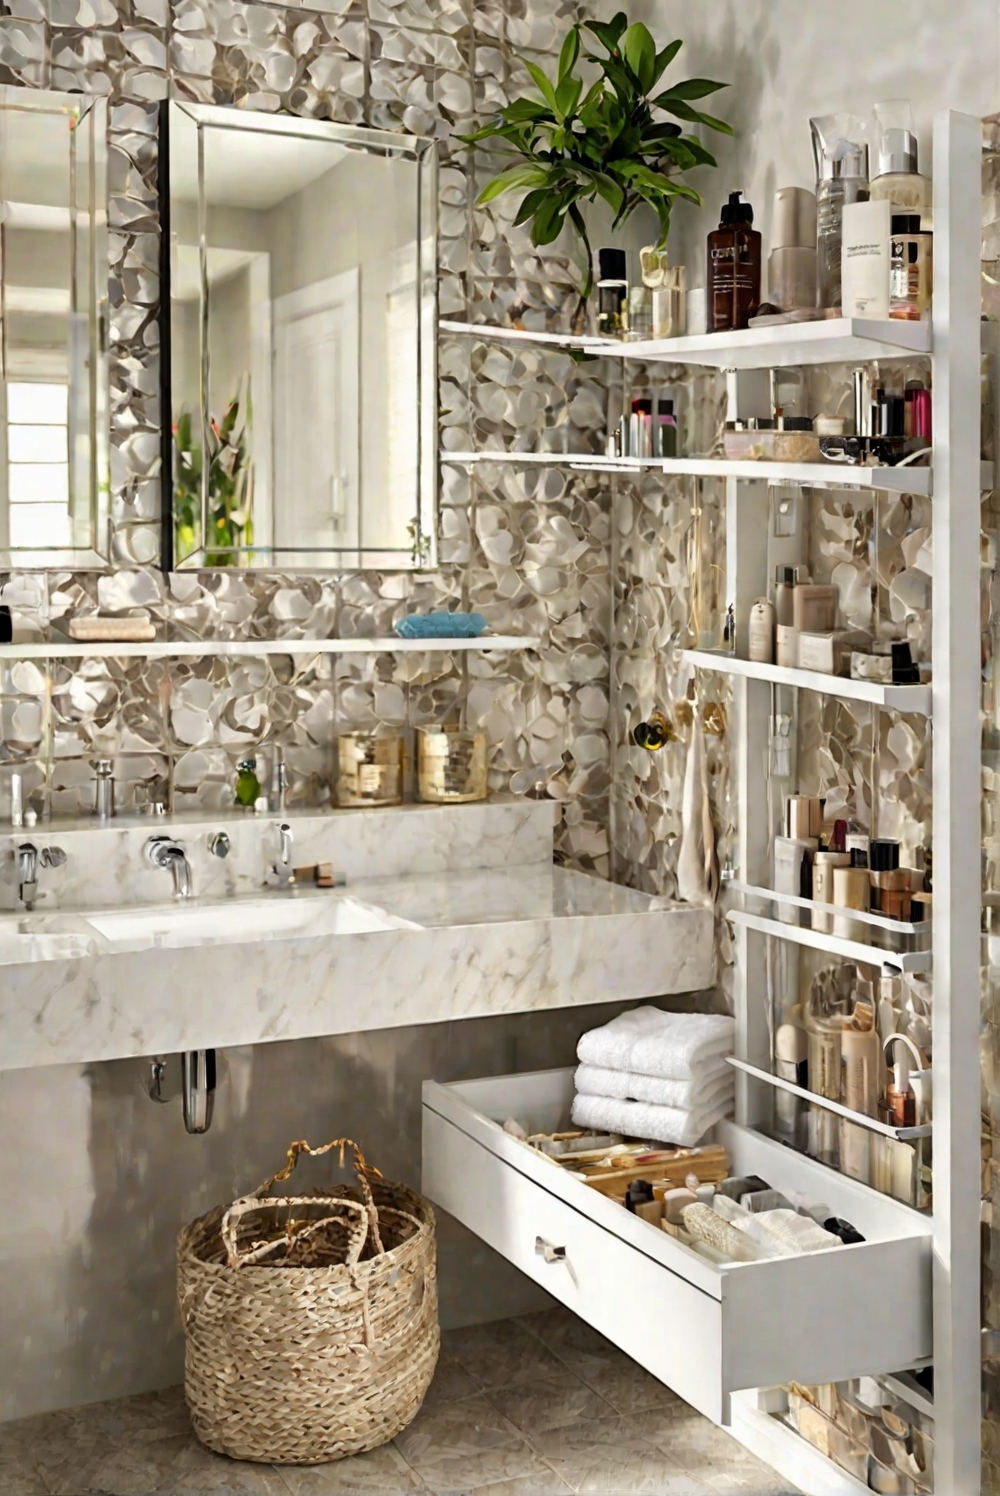 Your Ultimate Organizer: 5 Ideas That Will Revolutionize Your Bathroom Cabinets